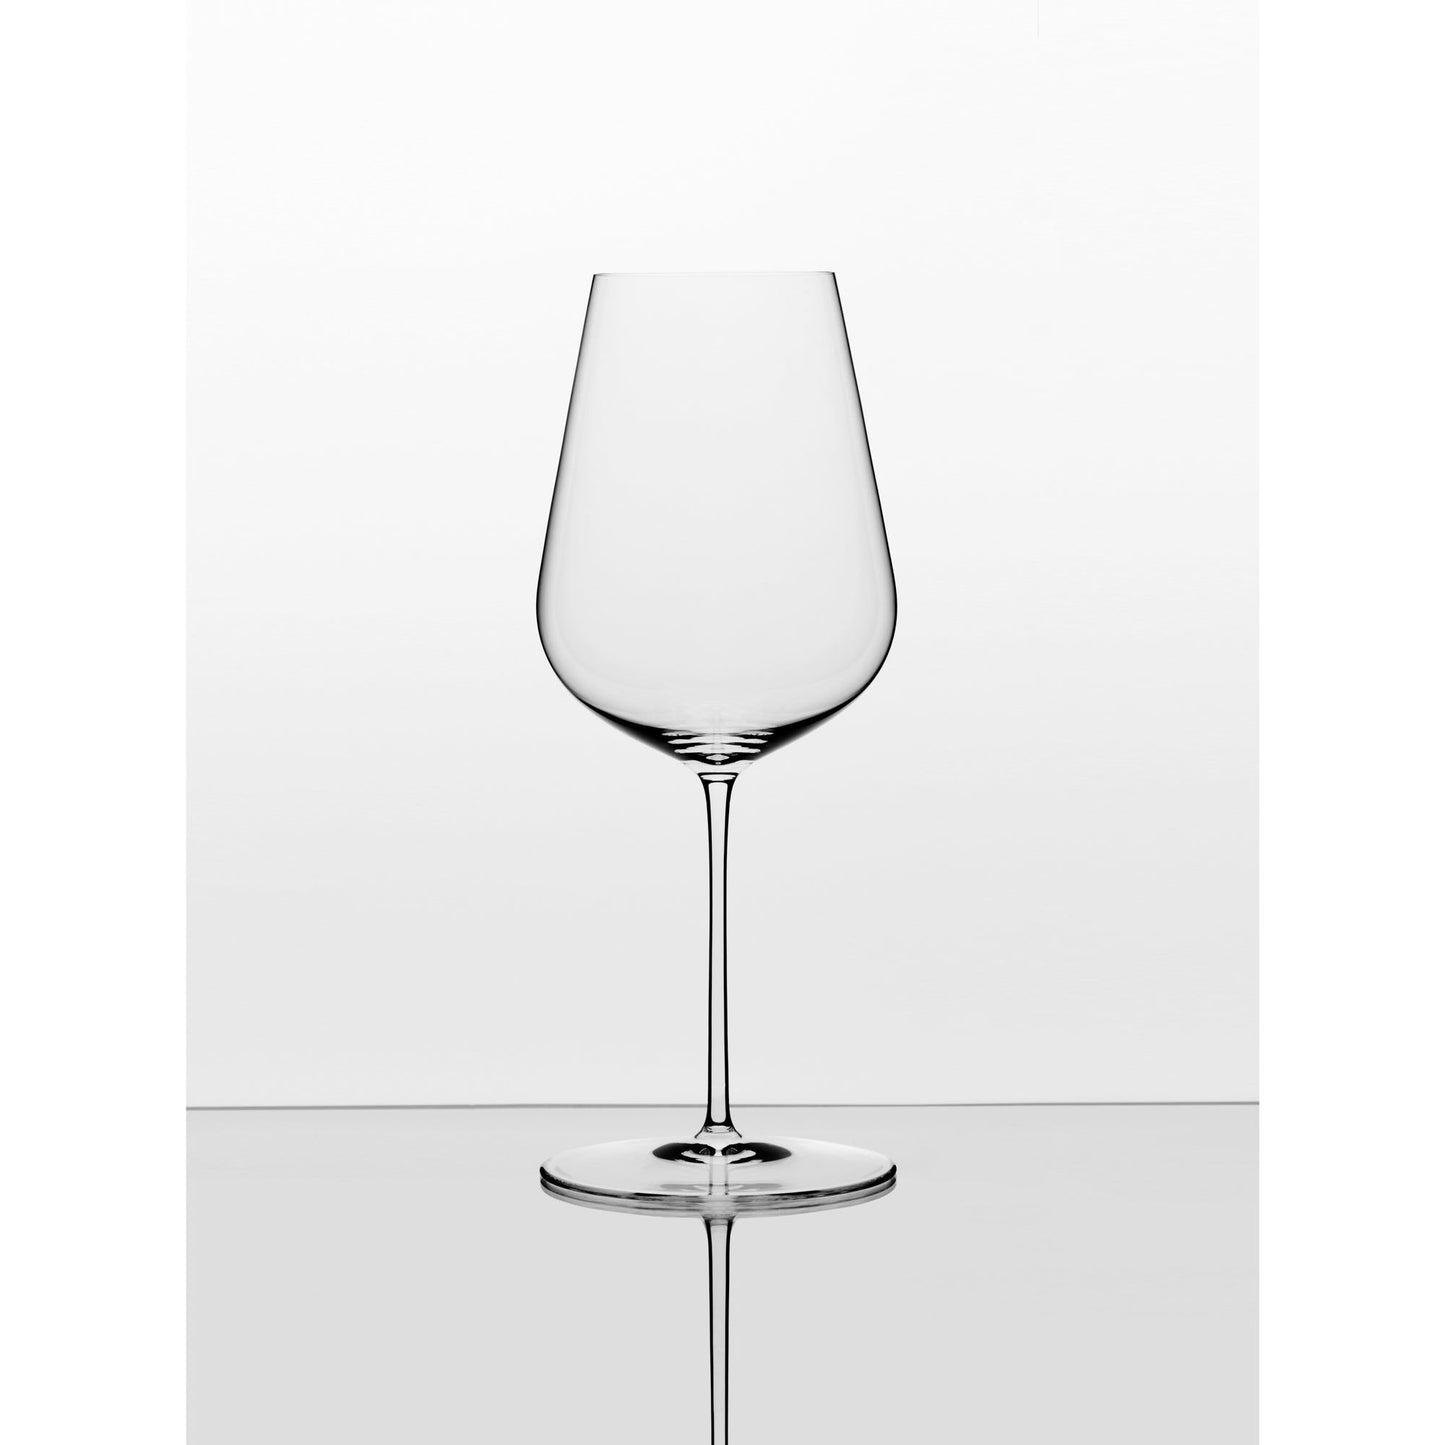 Richard Brendon The Jancis Robinson Collection | Wine Glass set of 6